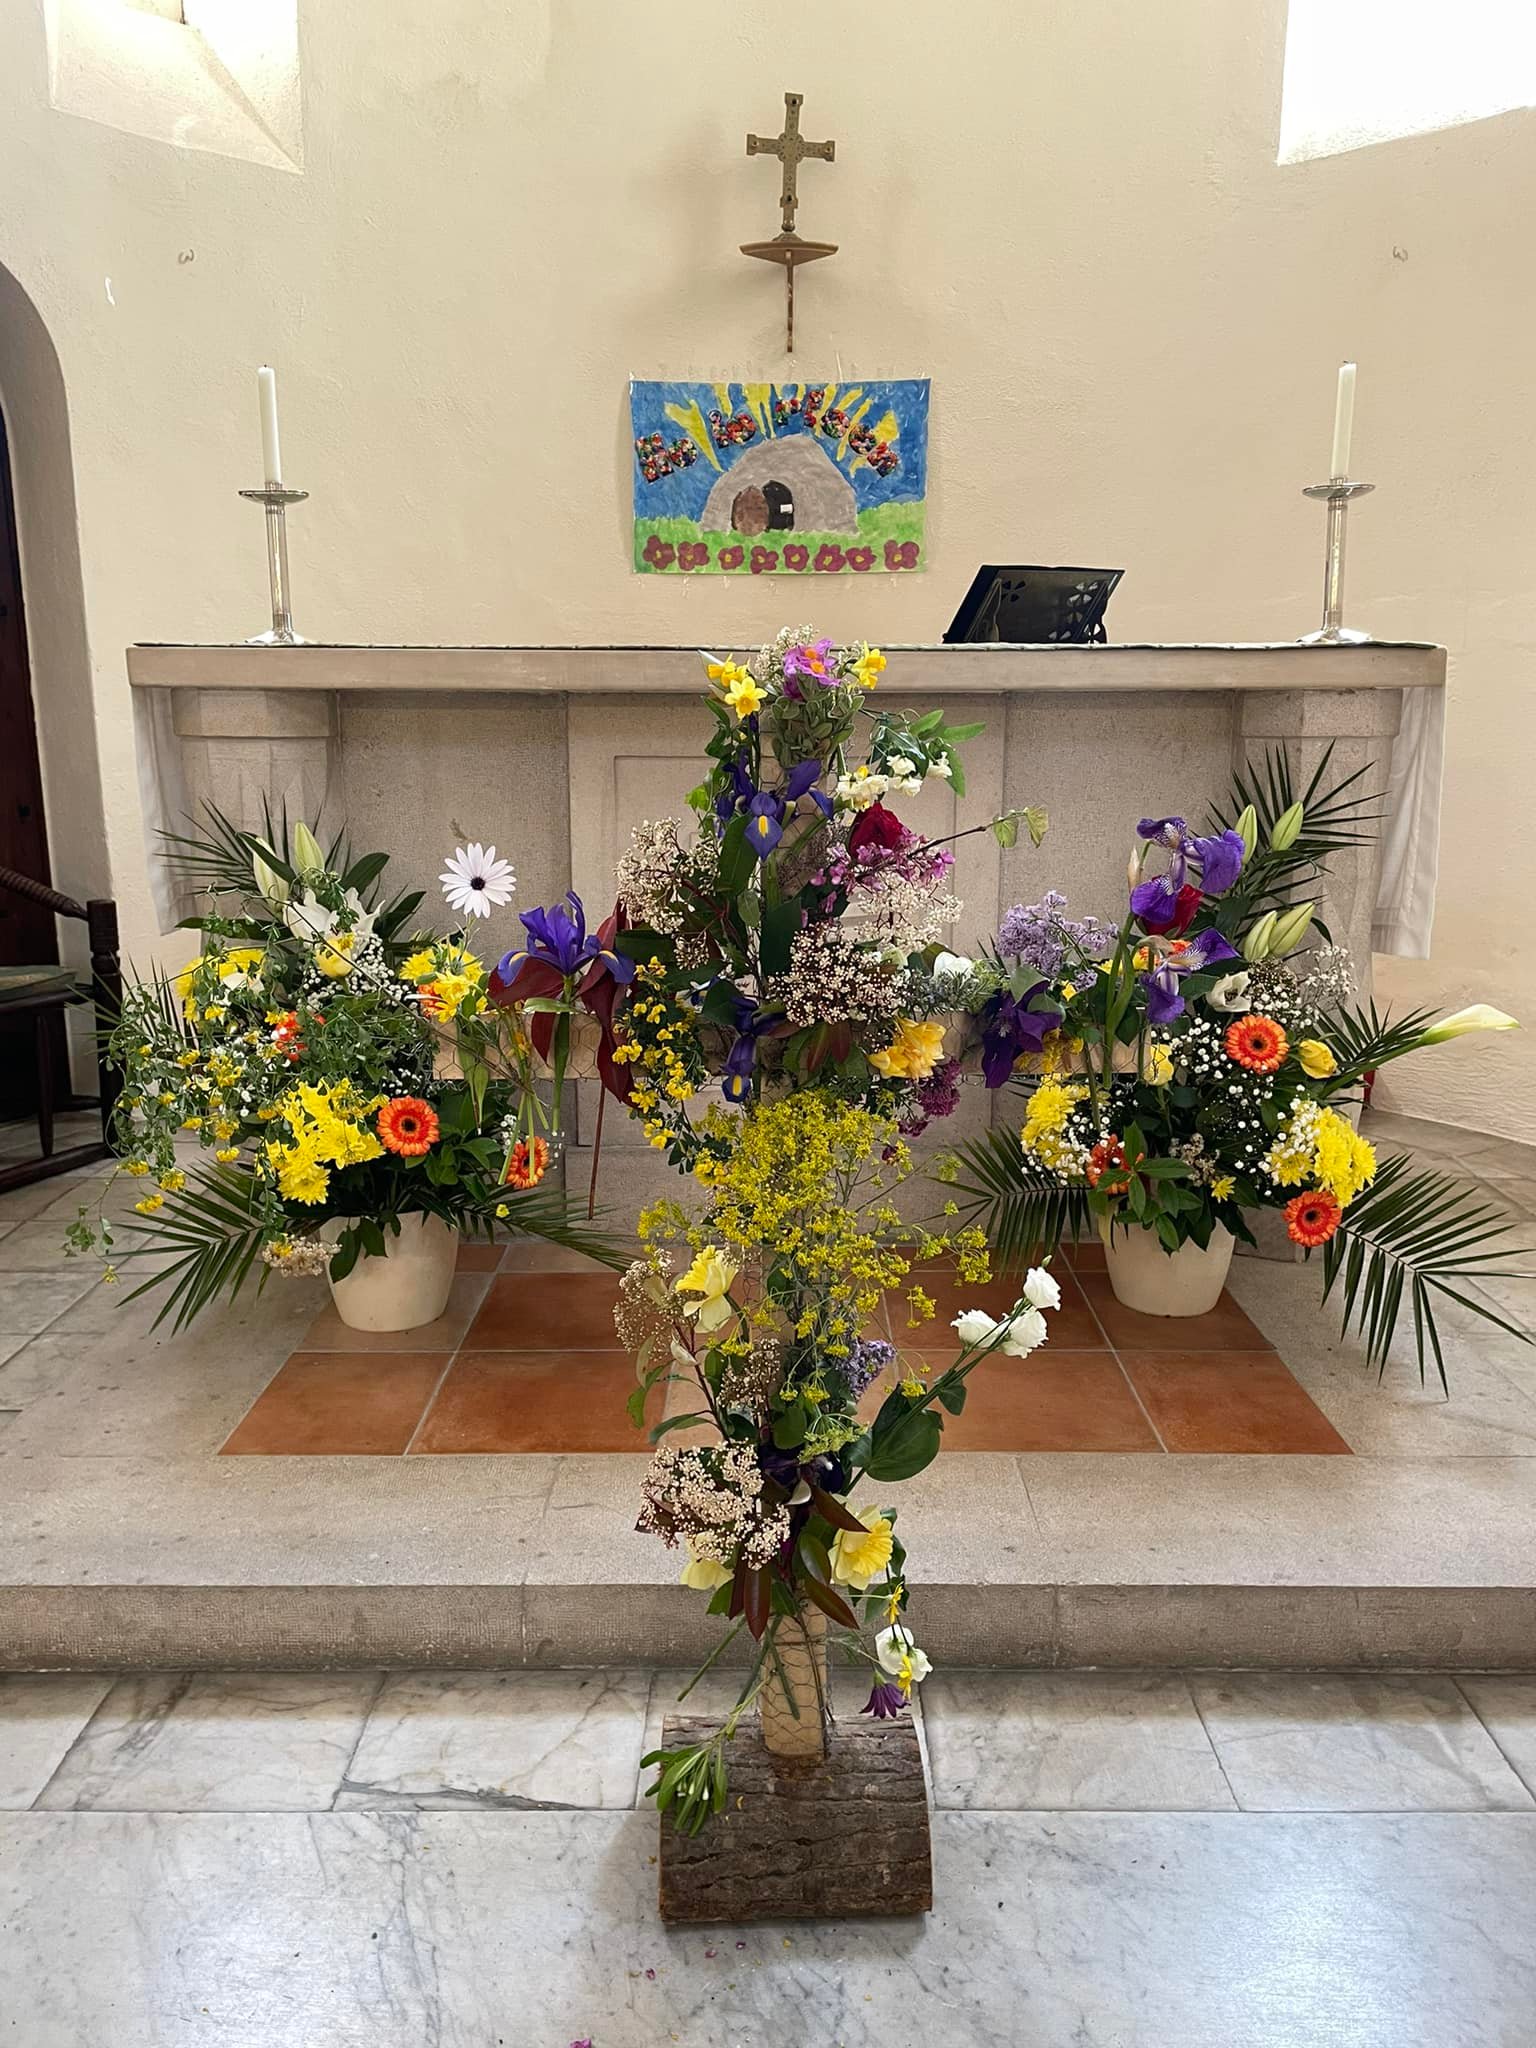 Flowers at St Johns.